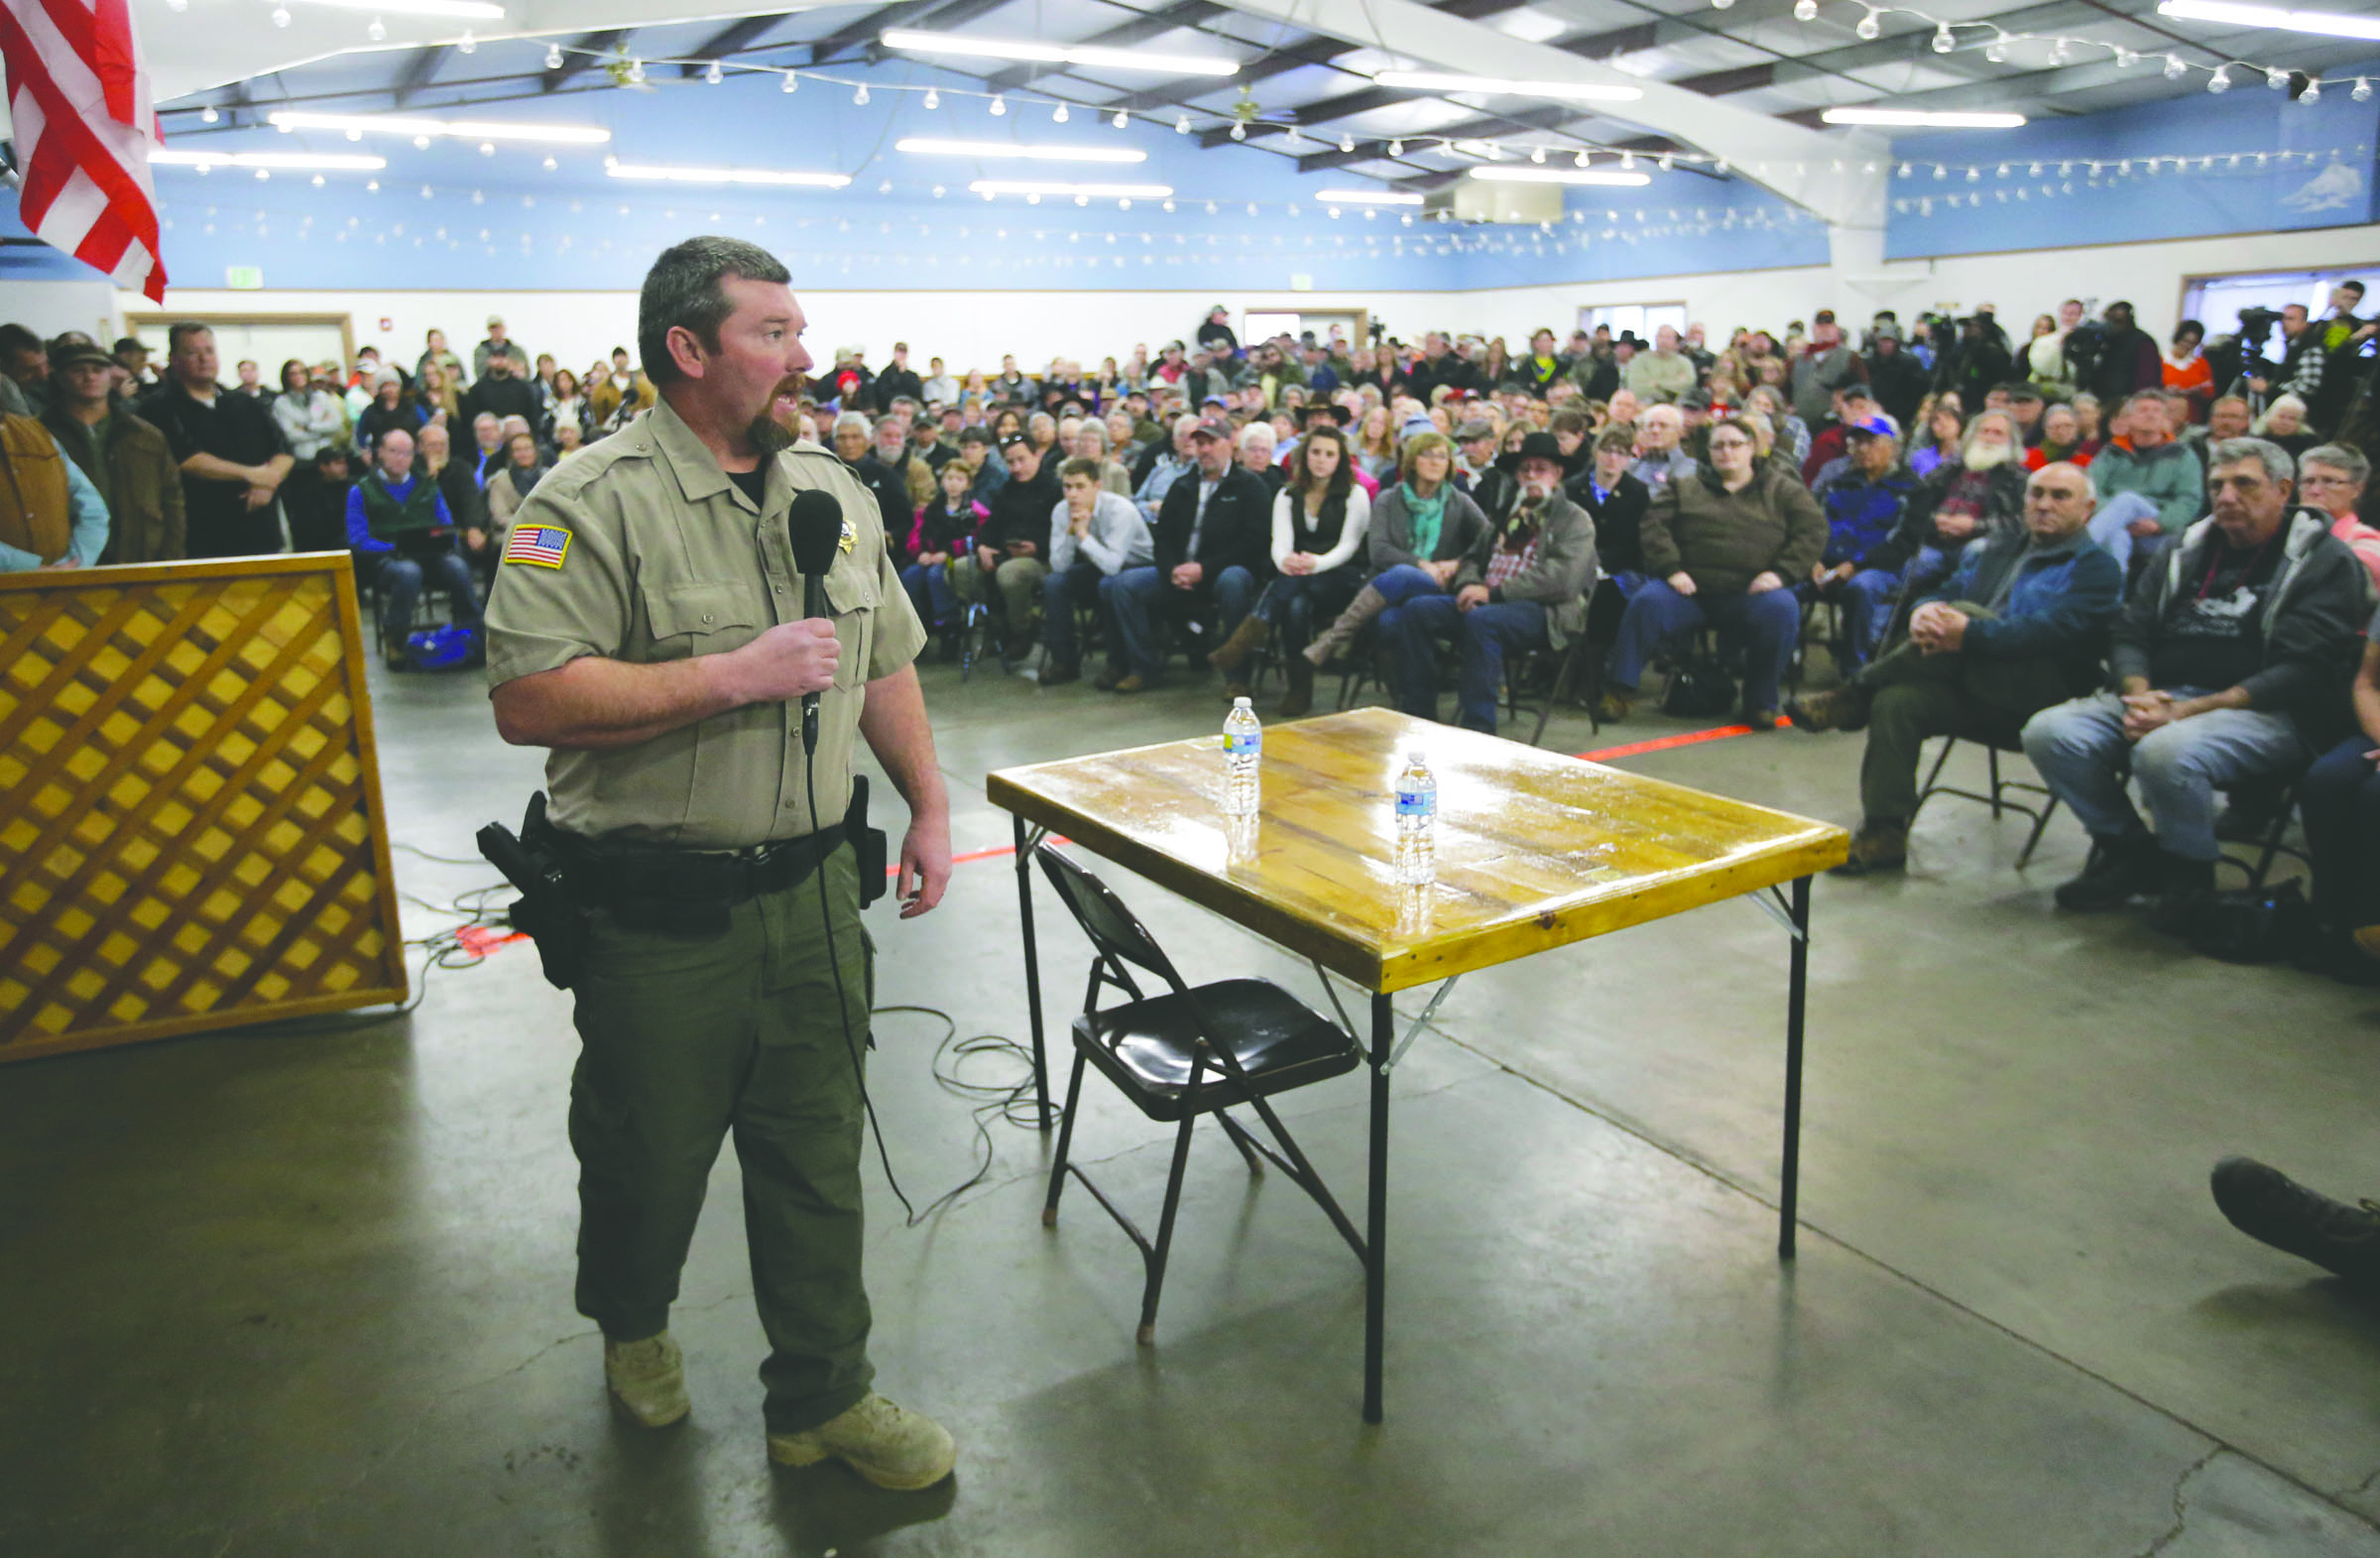 Harney County Sheriff David Ward leads a community meeting at the Harney County fairgrounds in Burns